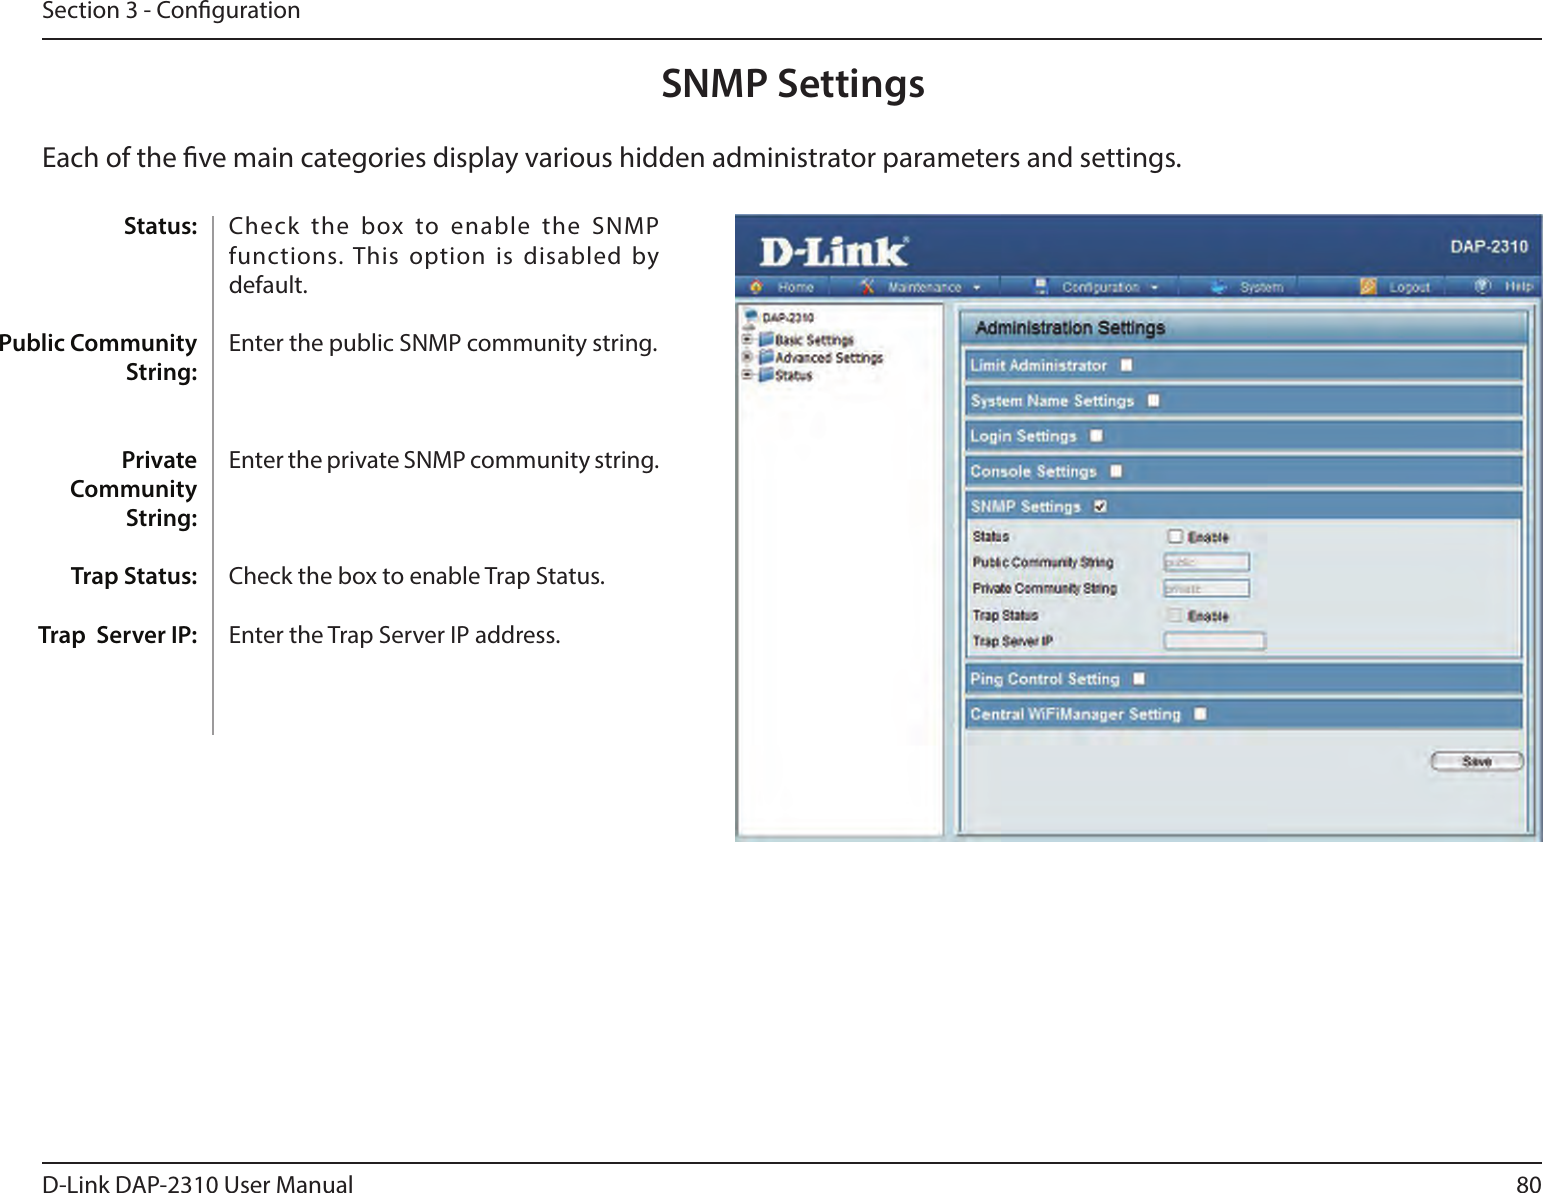 80D-Link DAP-2310 User ManualSection 3 - CongurationSNMP SettingsEach of the ve main categories display various hidden administrator parameters and settings.Check  the  box  to  enable  the  SNMP functions. This option  is disabled by default.Enter the public SNMP community string.Enter the private SNMP community string.Check the box to enable Trap Status.Enter the Trap Server IP address.Status:Public Community String:Private Community String:Trap Status:Trap  Server IP: